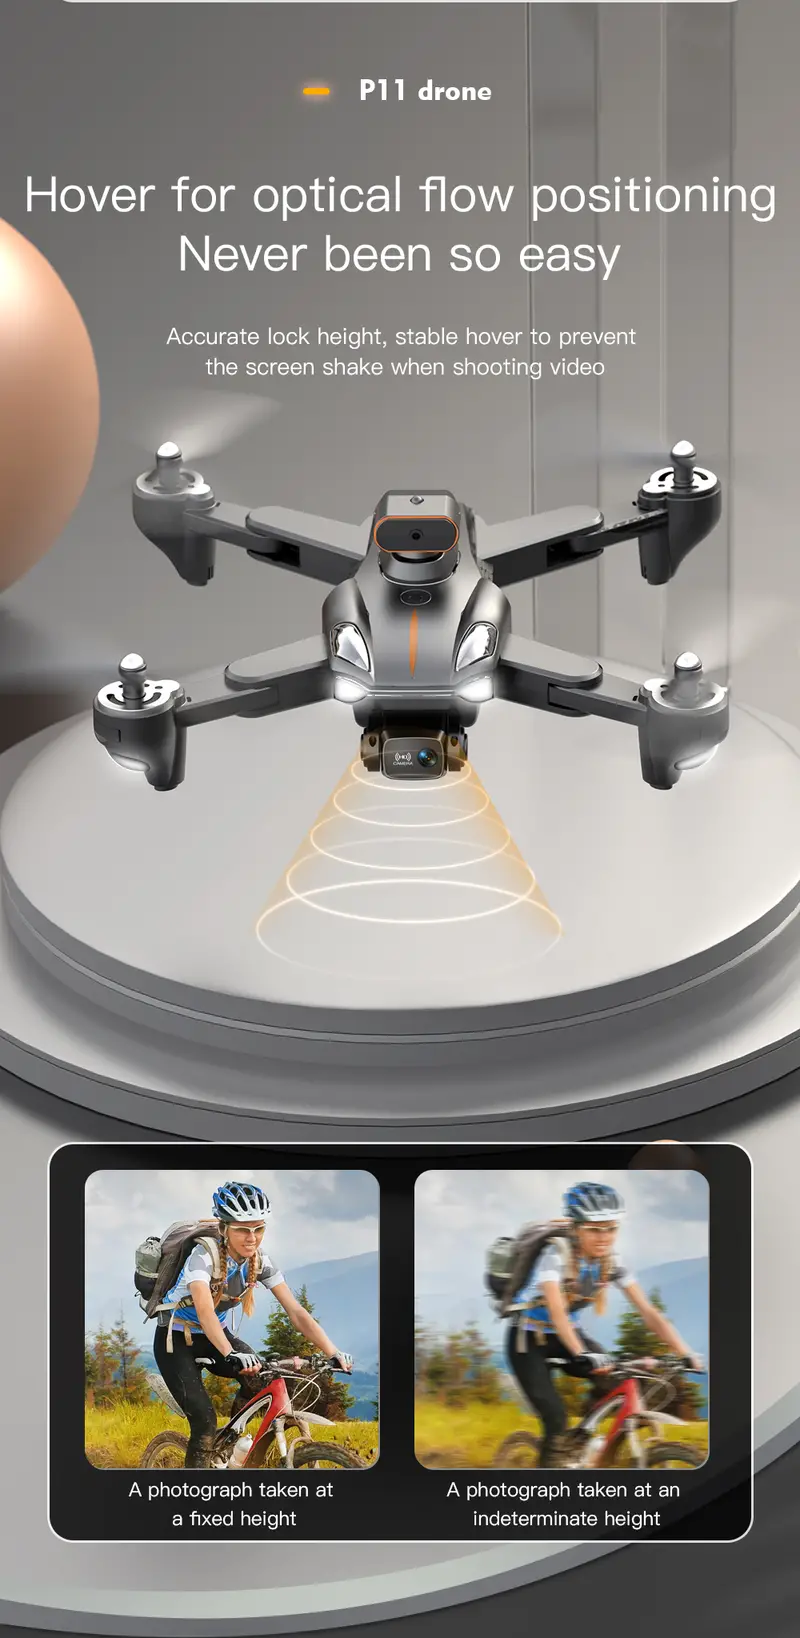 8k hd dual camera drone headless mode smart hover adjustable lens 360 obstacle avoidance high definition electric camera remote control long time flight details 8